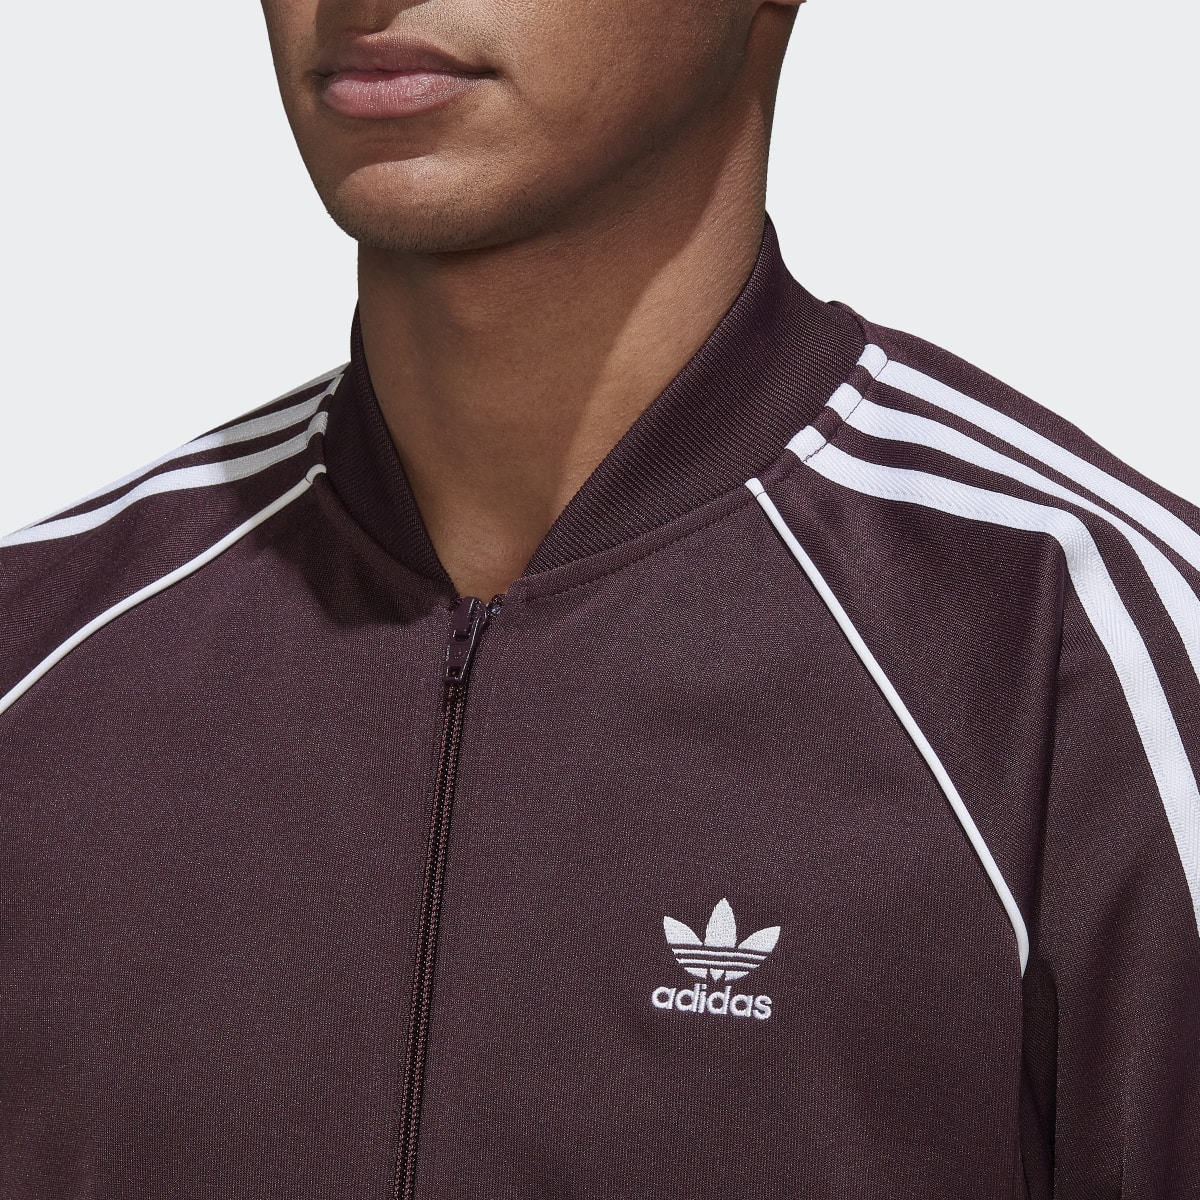 Adidas SST Track Top. 7